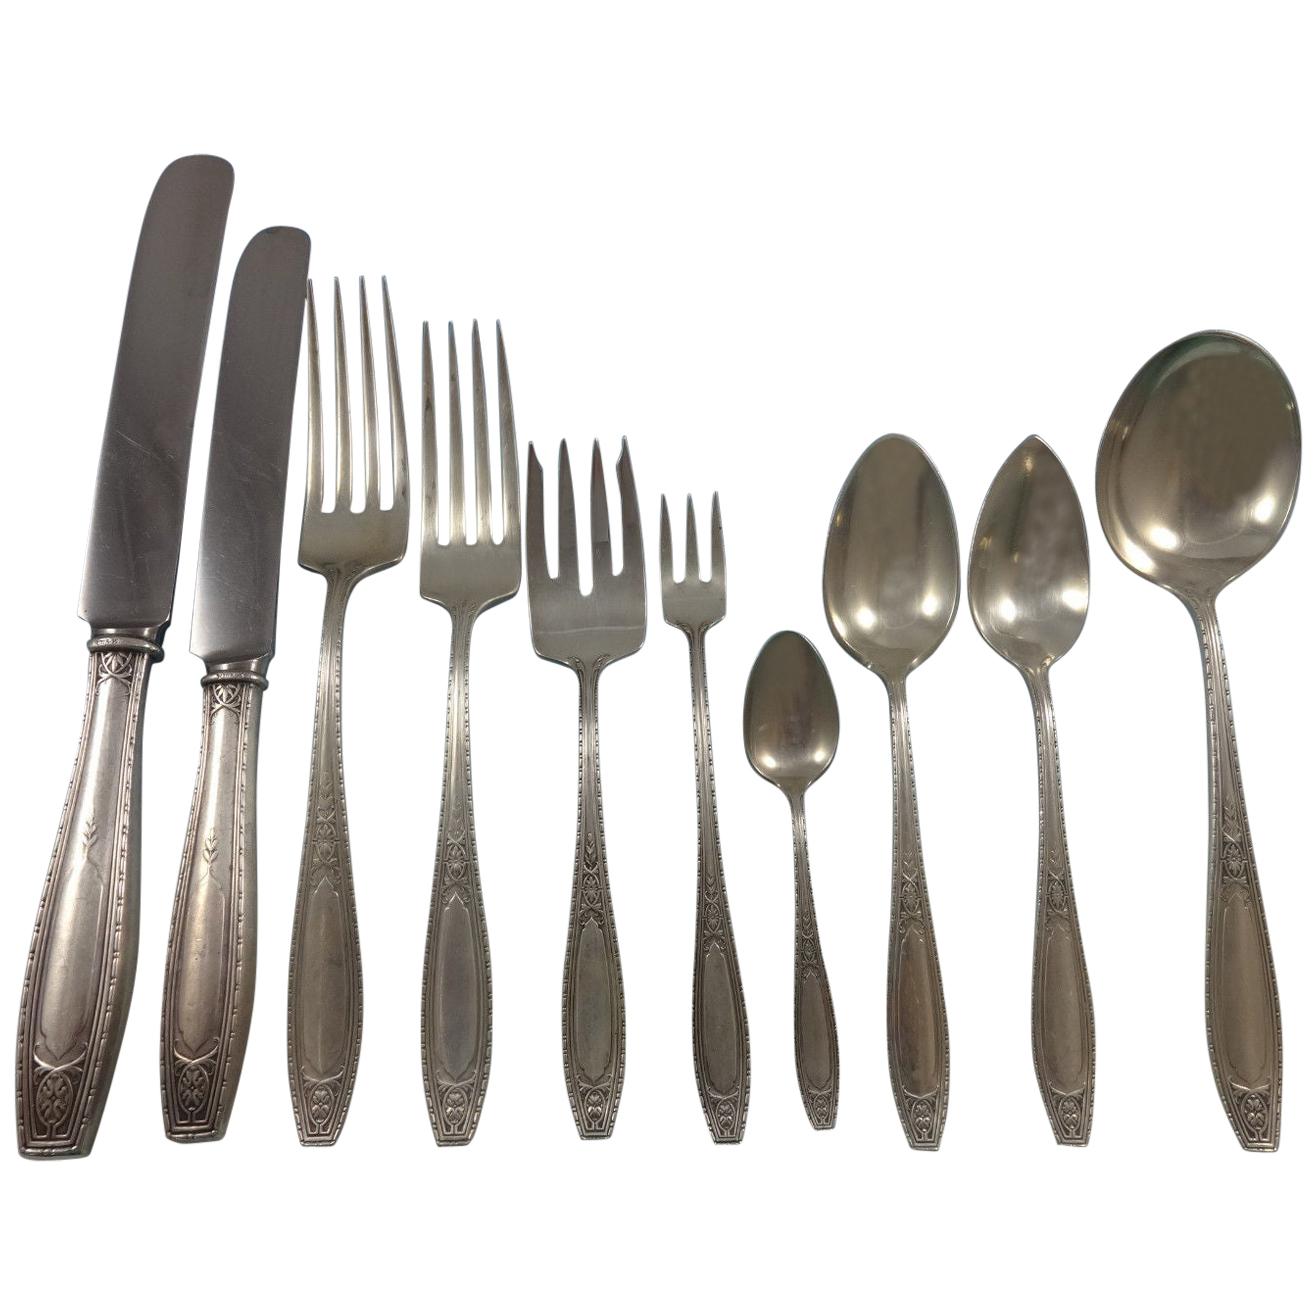 Juliet by Wallace Sterling Silver Flatware Dinner Set of 125 Pieces